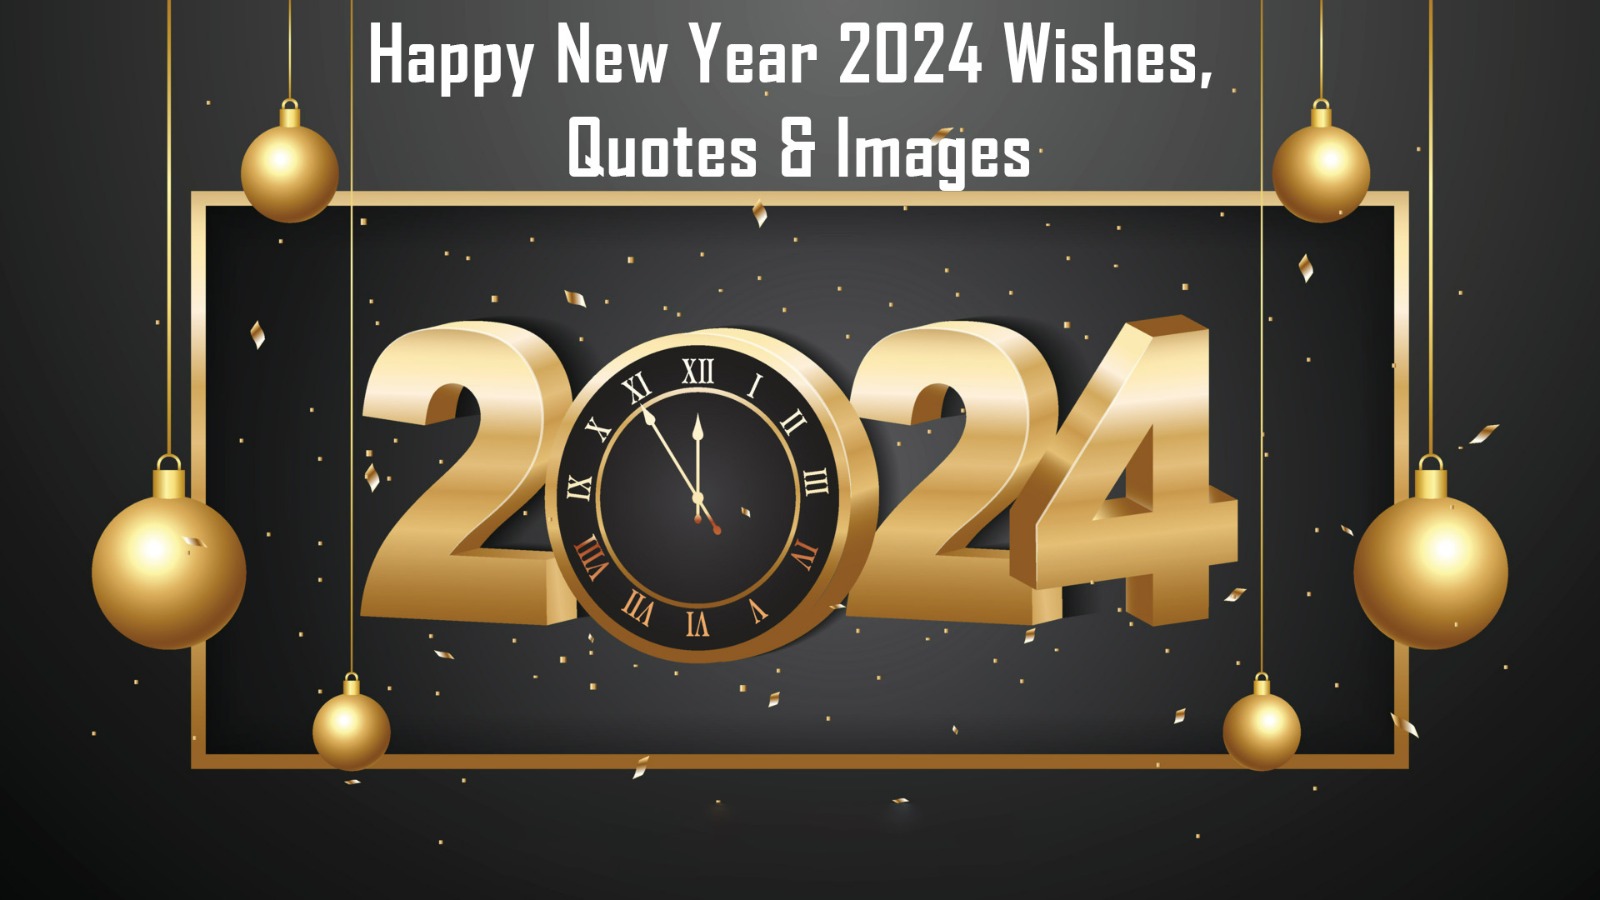 Happy New Year 2024 Wishes, Quotes & Images